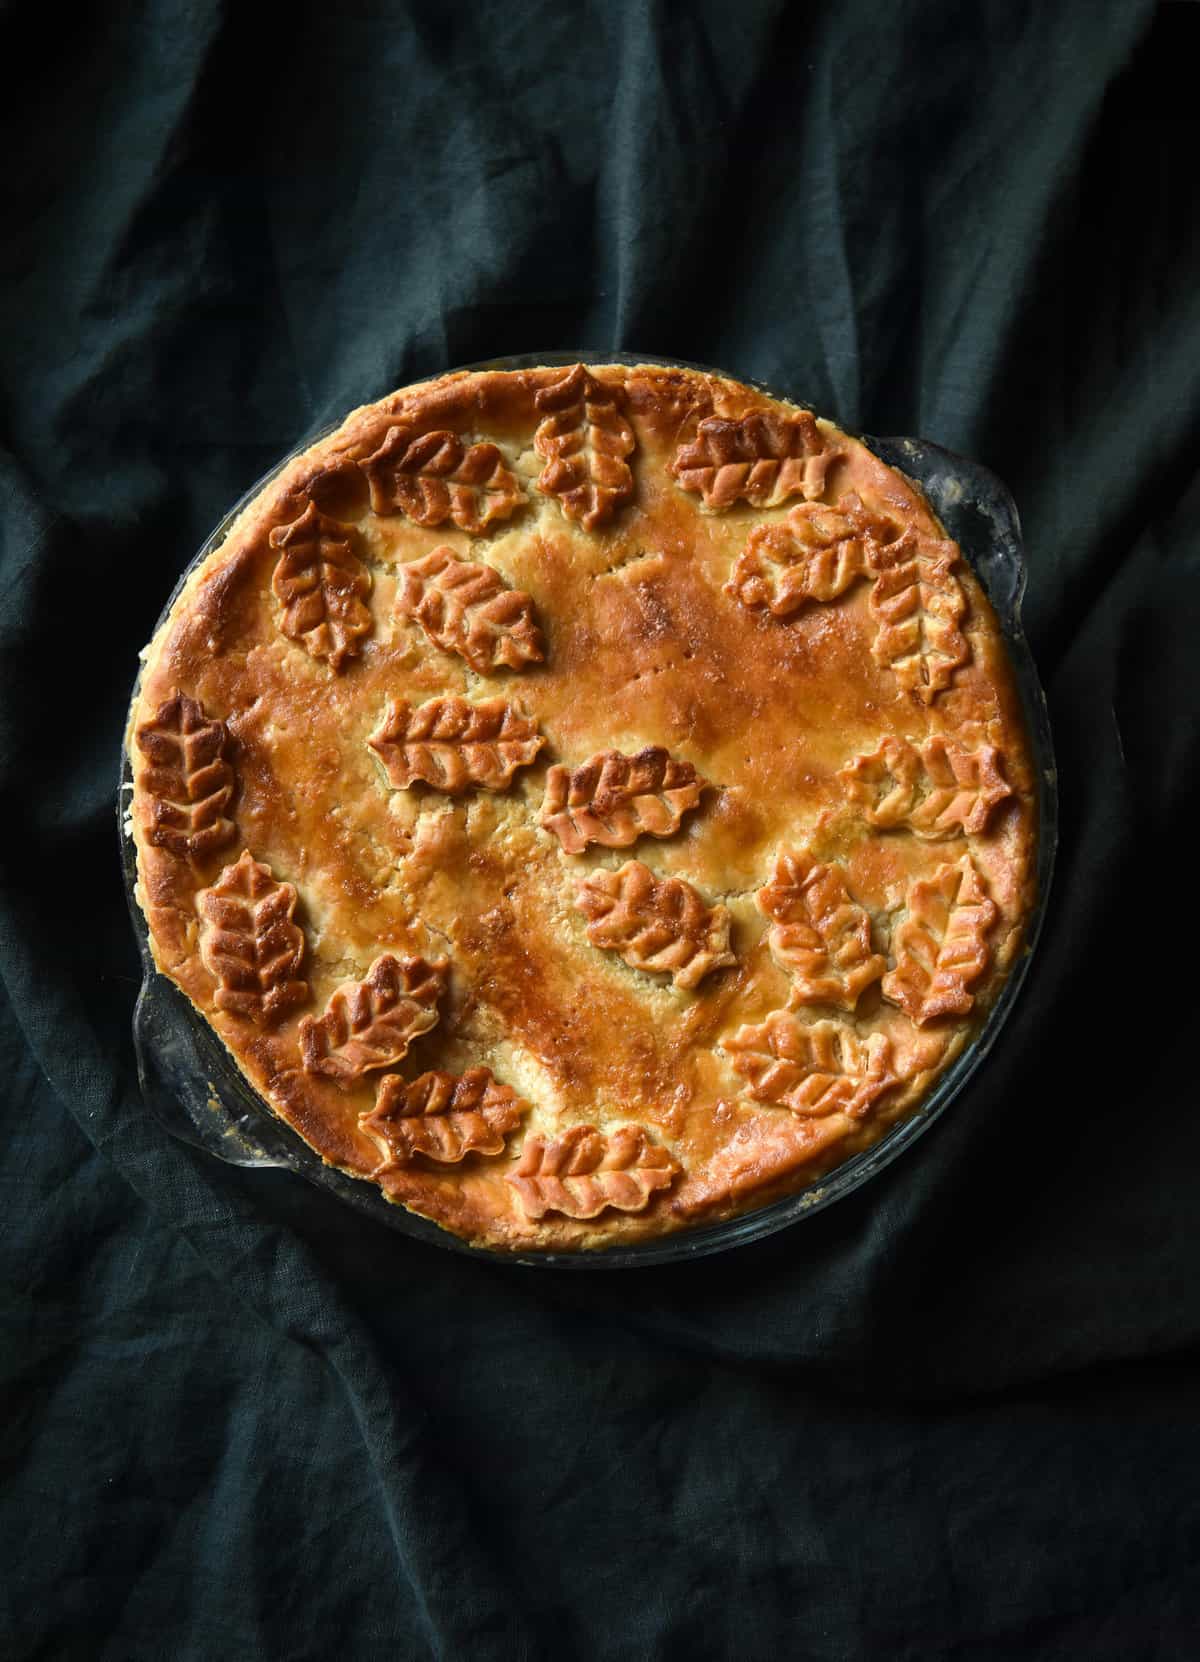 A gluten free greens and feta pie with flaky pastry, adorned with pastry leaves and styled against a forrest green backdrop